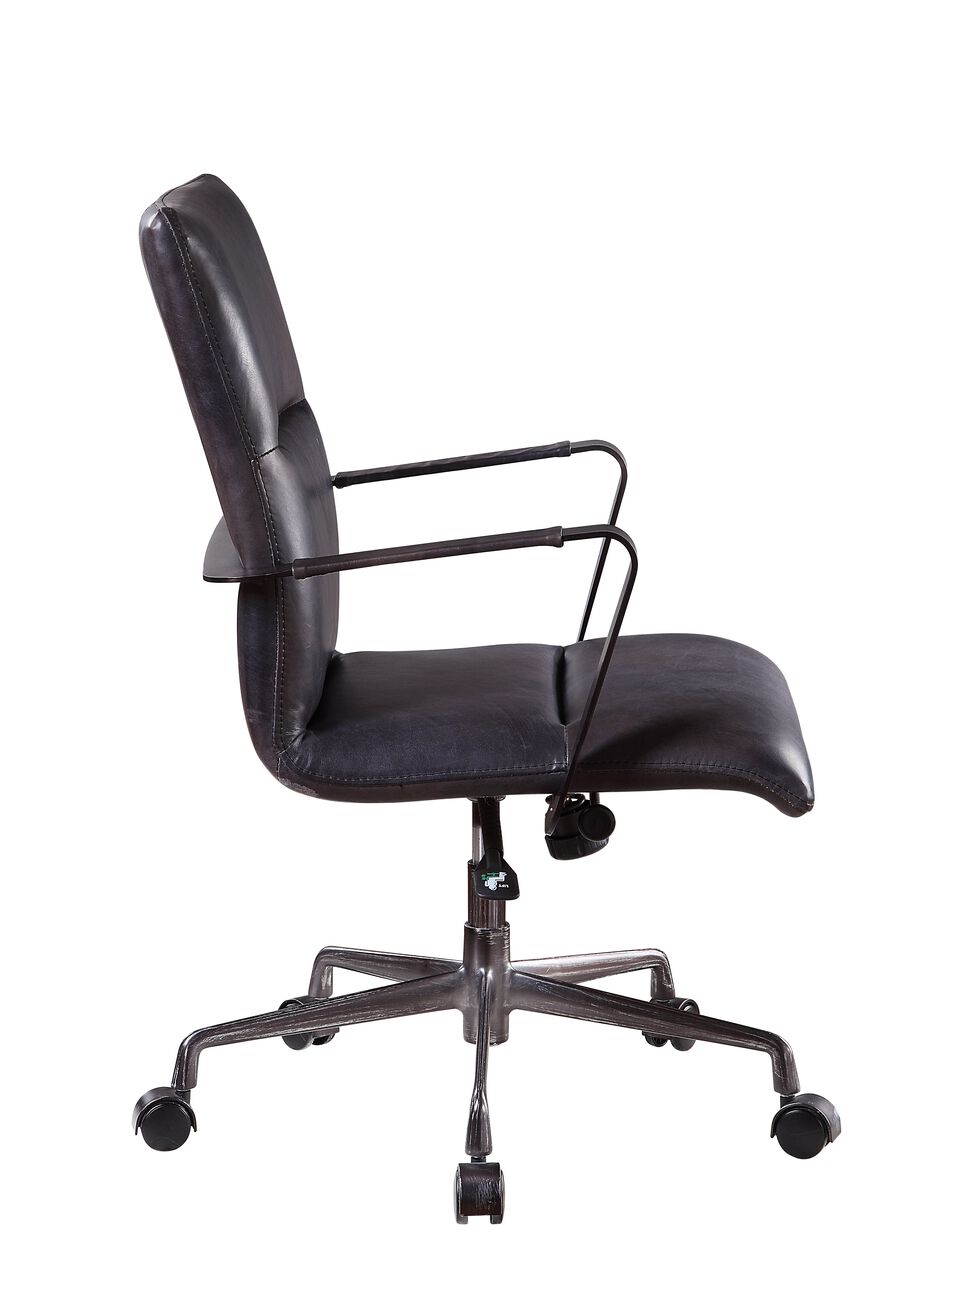 5 Star Base Faux Leather Upholstered Wooden Office Chair, Black